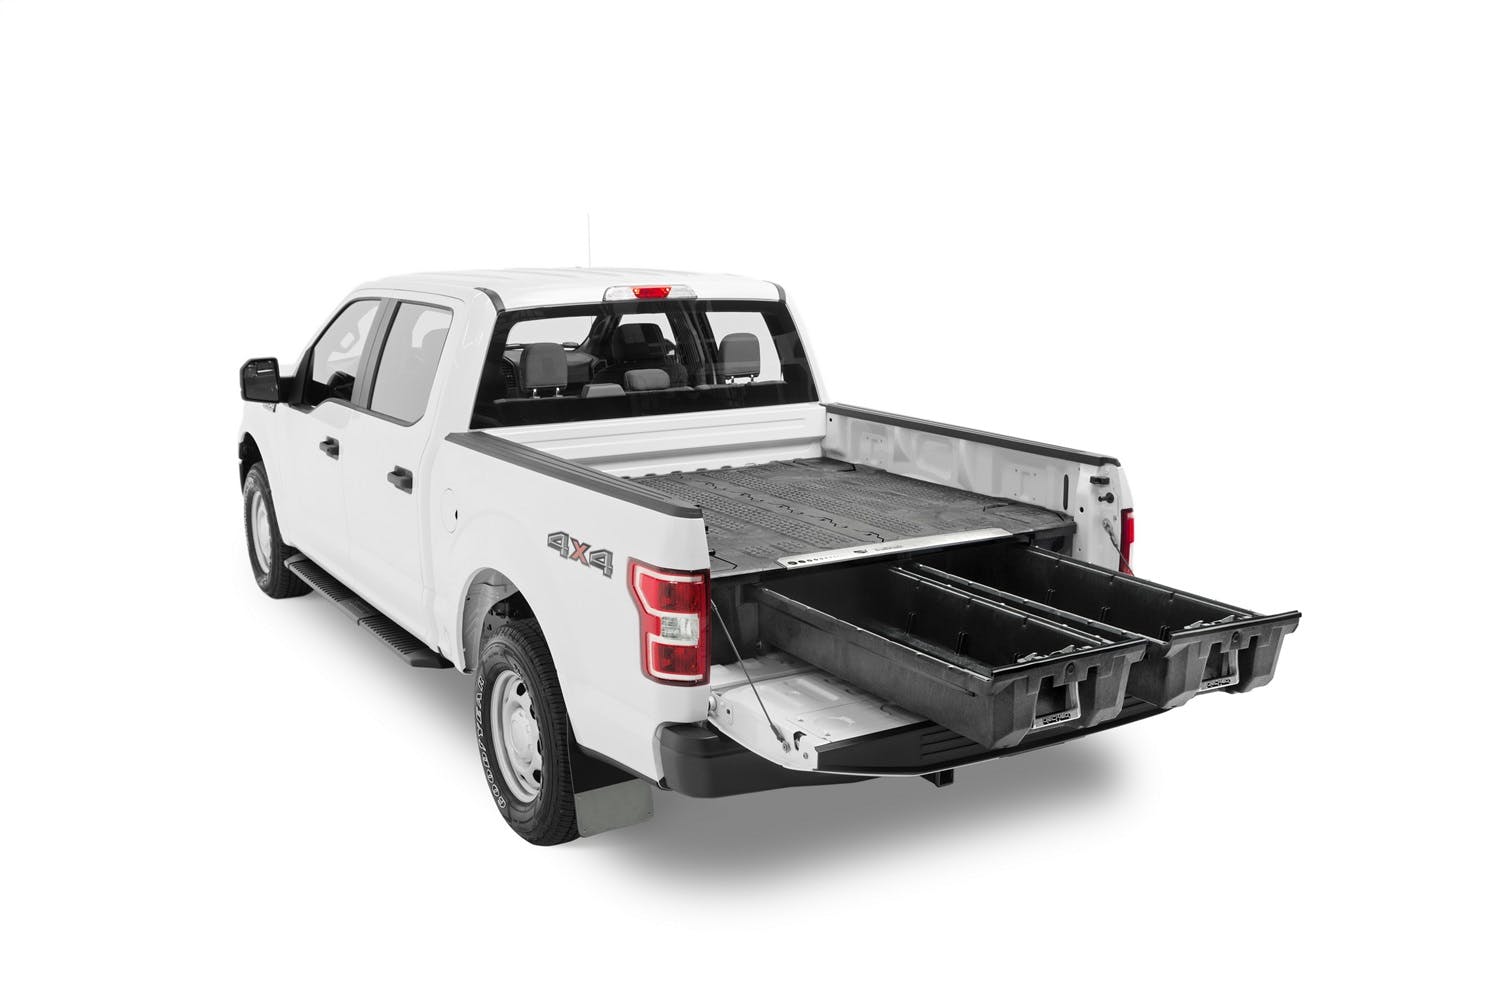 DECKED DF8 Two Drawer Storage System for a Full Size Pick Up Truck